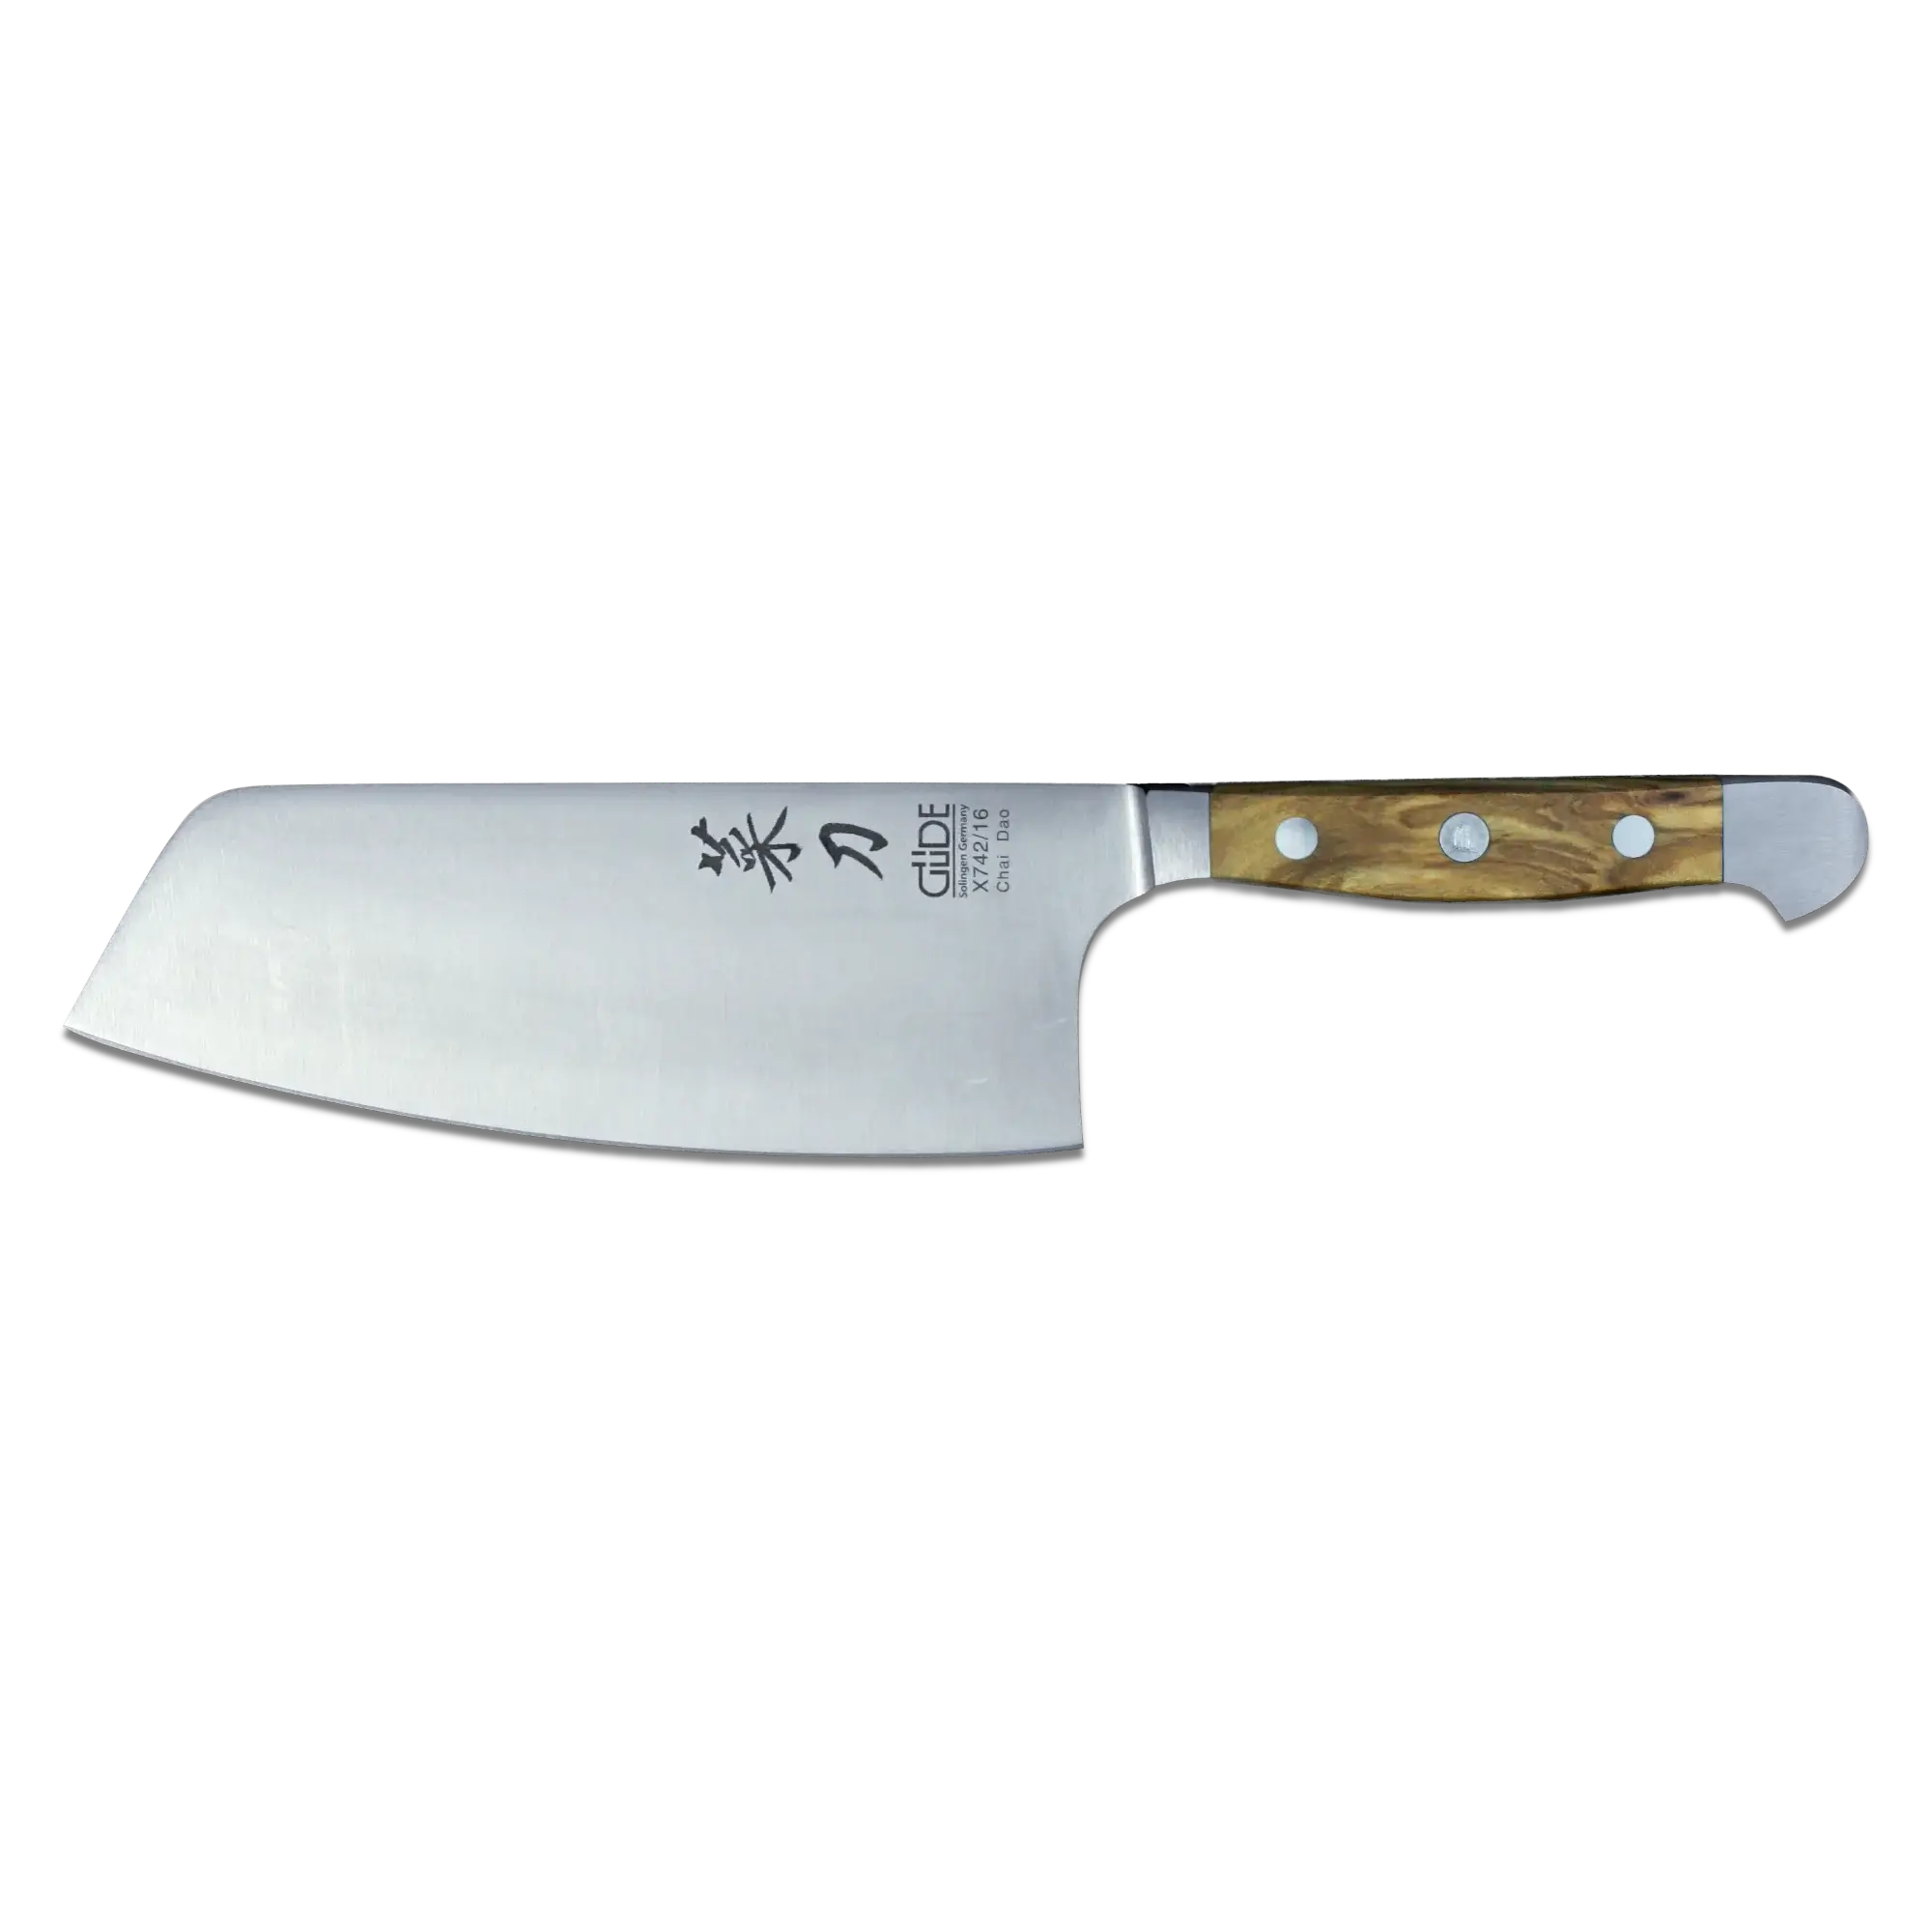 ALPHA OLIVE | Chai Dao Chinese Chef Knife 6 1/2" Blade | Forged Steel/Olive Wood Handle